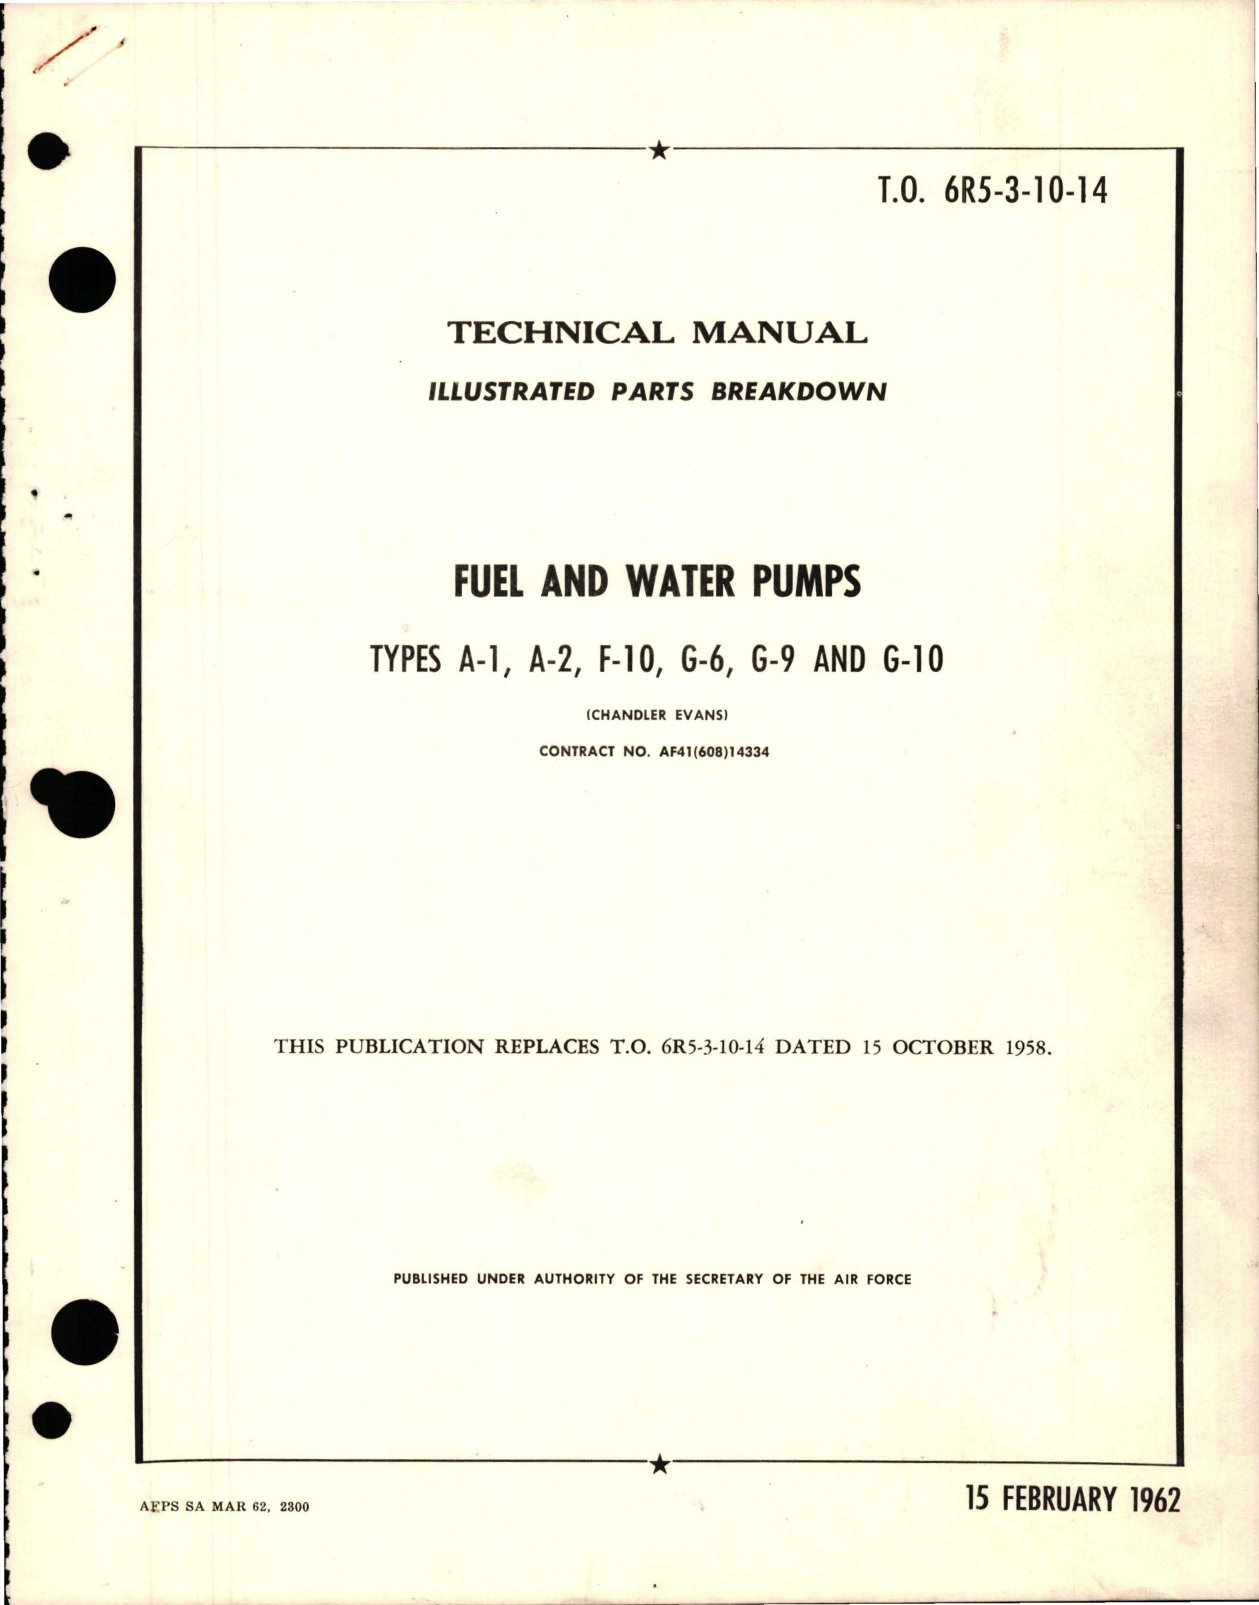 Sample page 1 from AirCorps Library document: Illustrated Parts Breakdown for Fuel and Water Pumps - Types A-1, A-2, F-10, G-6, and G-10 